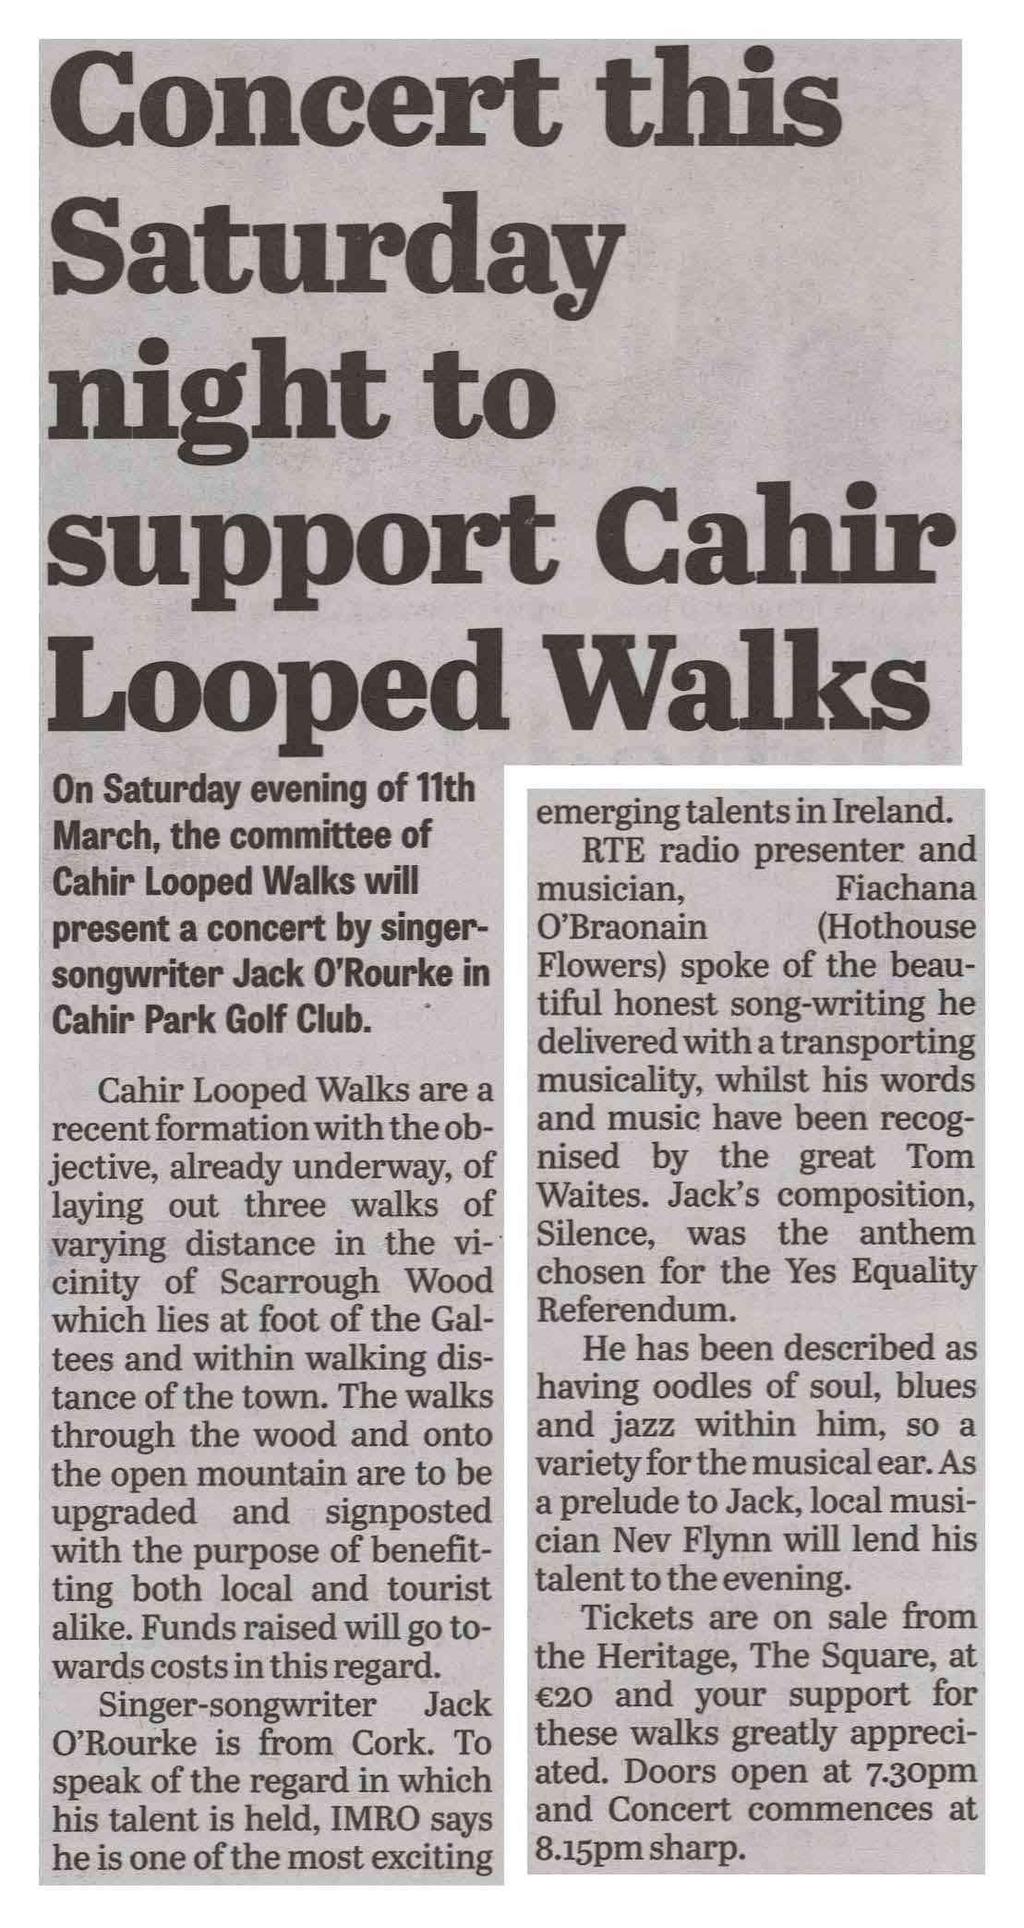 Cahir Looped Walks are a recent formation with the objective, already underway, of laying out three walks of varying distance in the vicinity of Scarrough Wood which lies at foot of the Galtees and